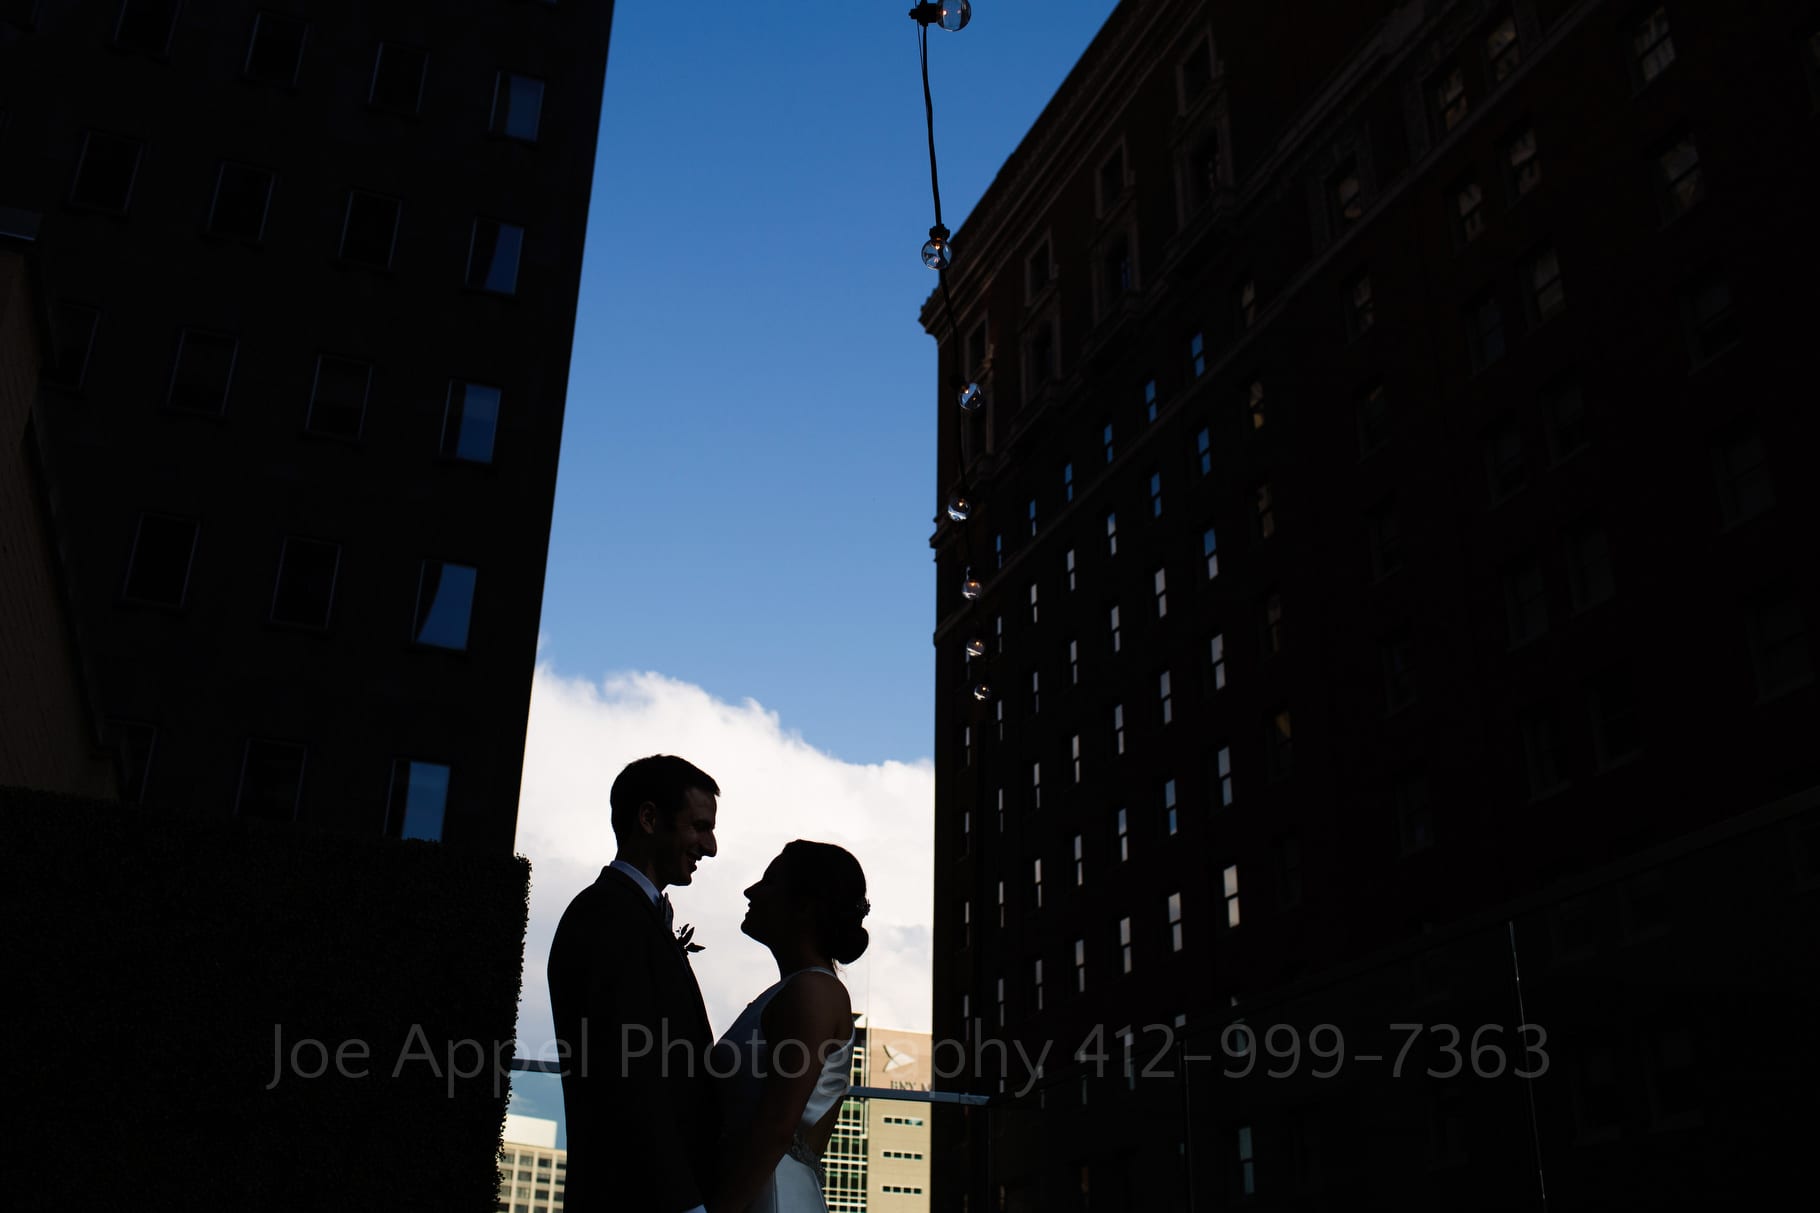 A bride and groom are silhouetted against a gap between two buildings in downtown Pittsburgh.